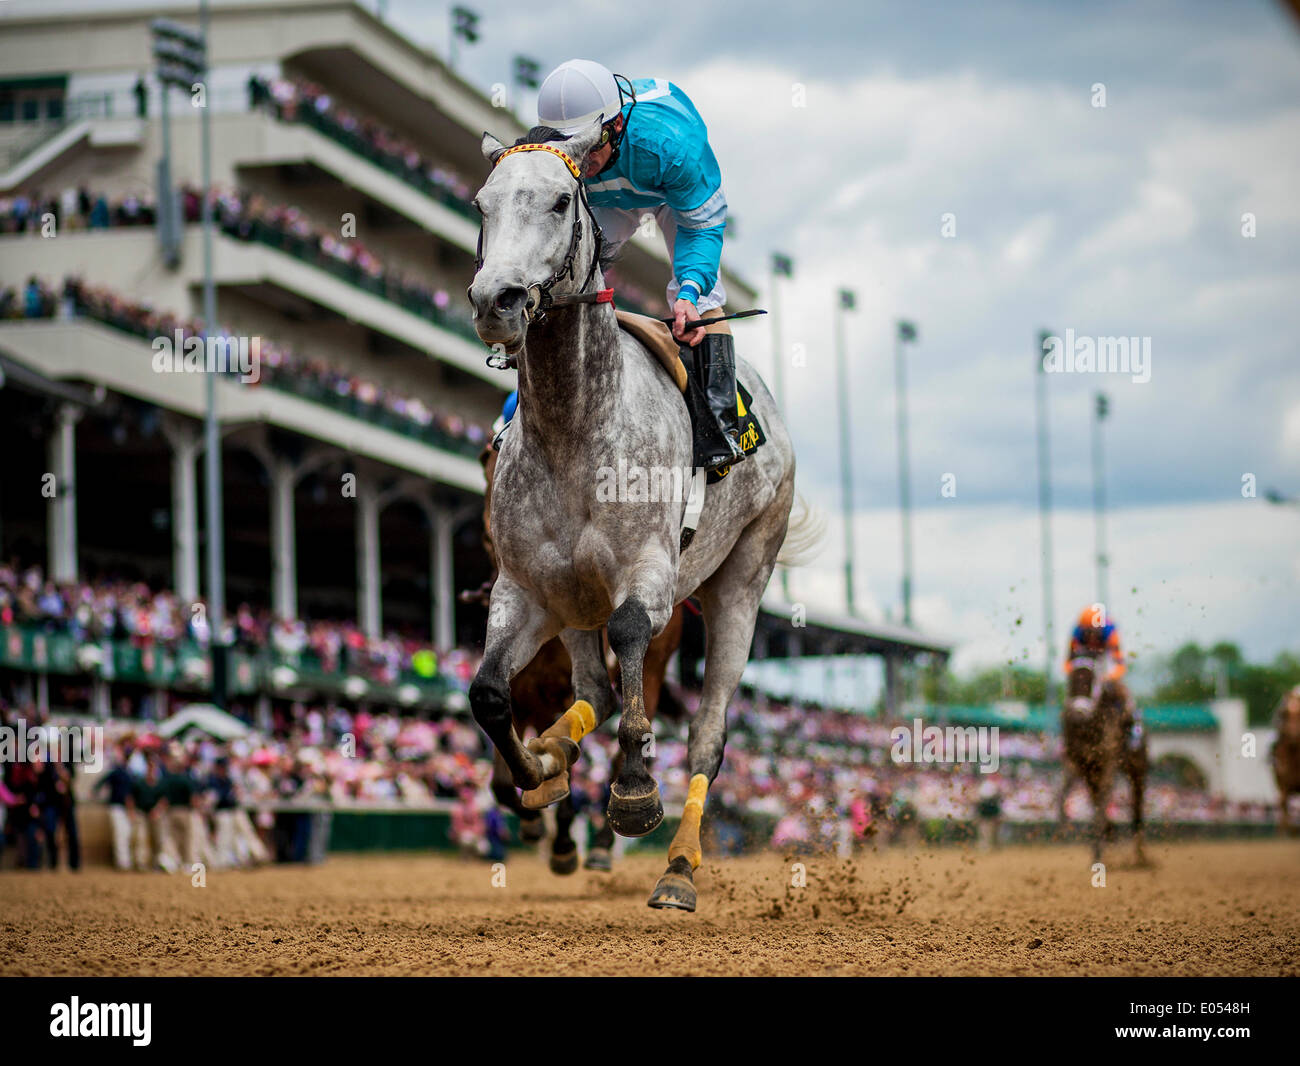 Louisville, KY, USA. 3rd May, 2014. May 01, 2014: On Fire Baby with Joe Johnson up wins the La Troienne Stakes at Churchill Downs in Louisville Ky. Alex Evers/ESW/CSM/Alamy Live News Stock Photo